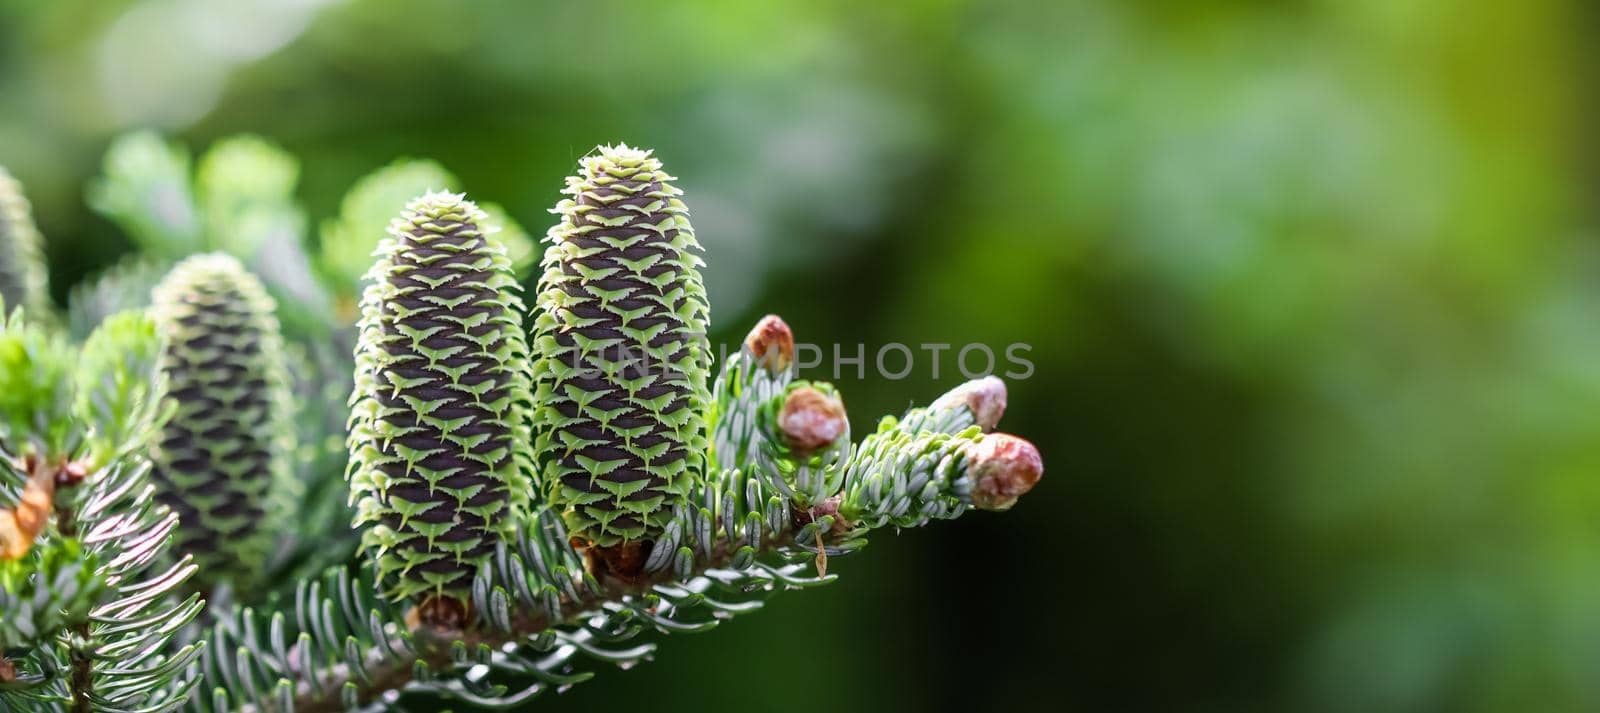 A branch of Korean fir with cones and raindrops on blurred background by Olayola